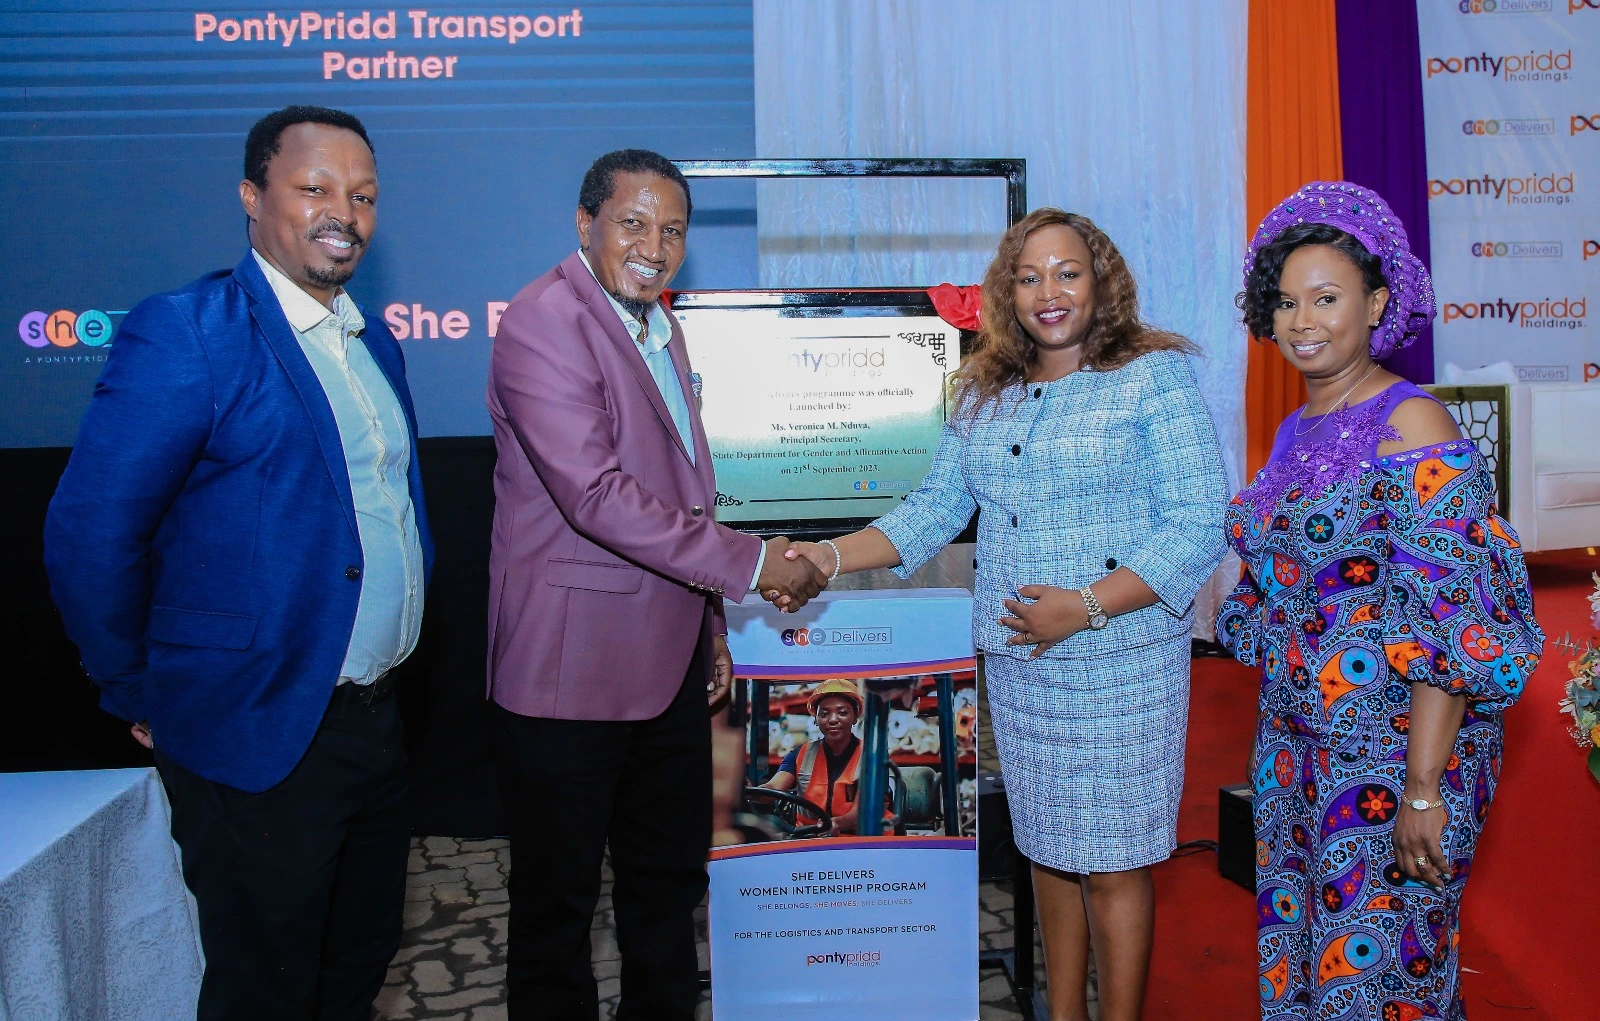 ‘She Delivers’ Program Launched to Empower Women in Kenya’s Transport and Logistics Industry